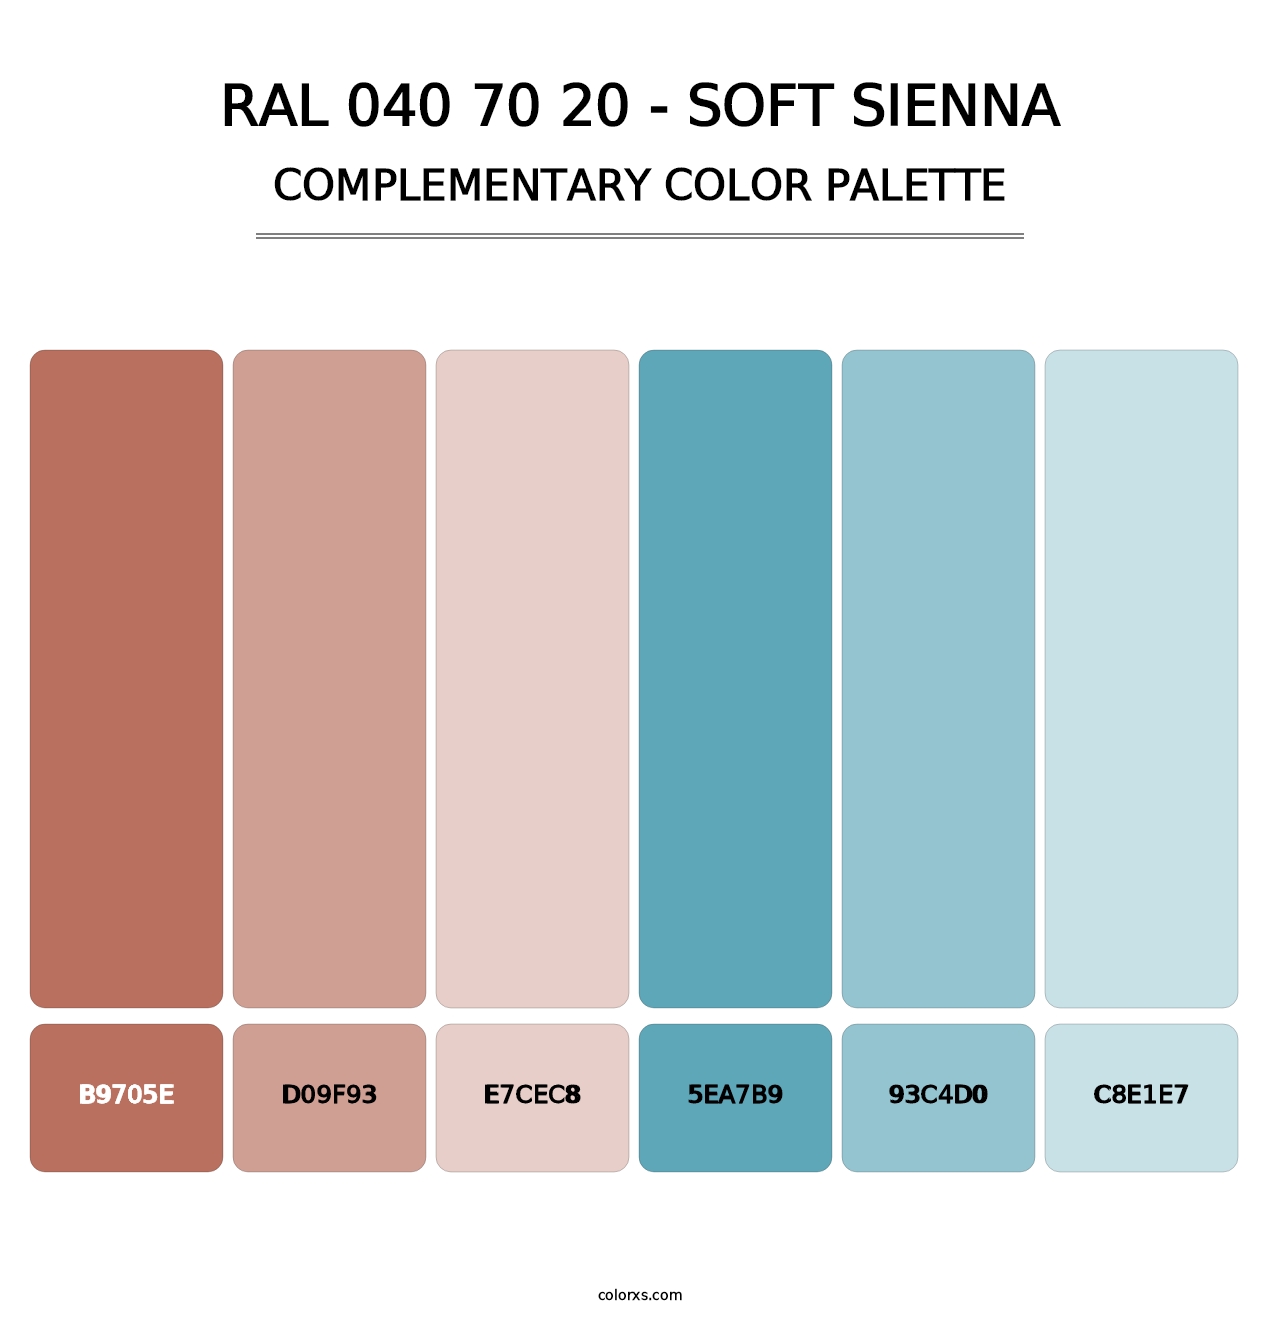 RAL 040 70 20 - Soft Sienna - Complementary Color Palette